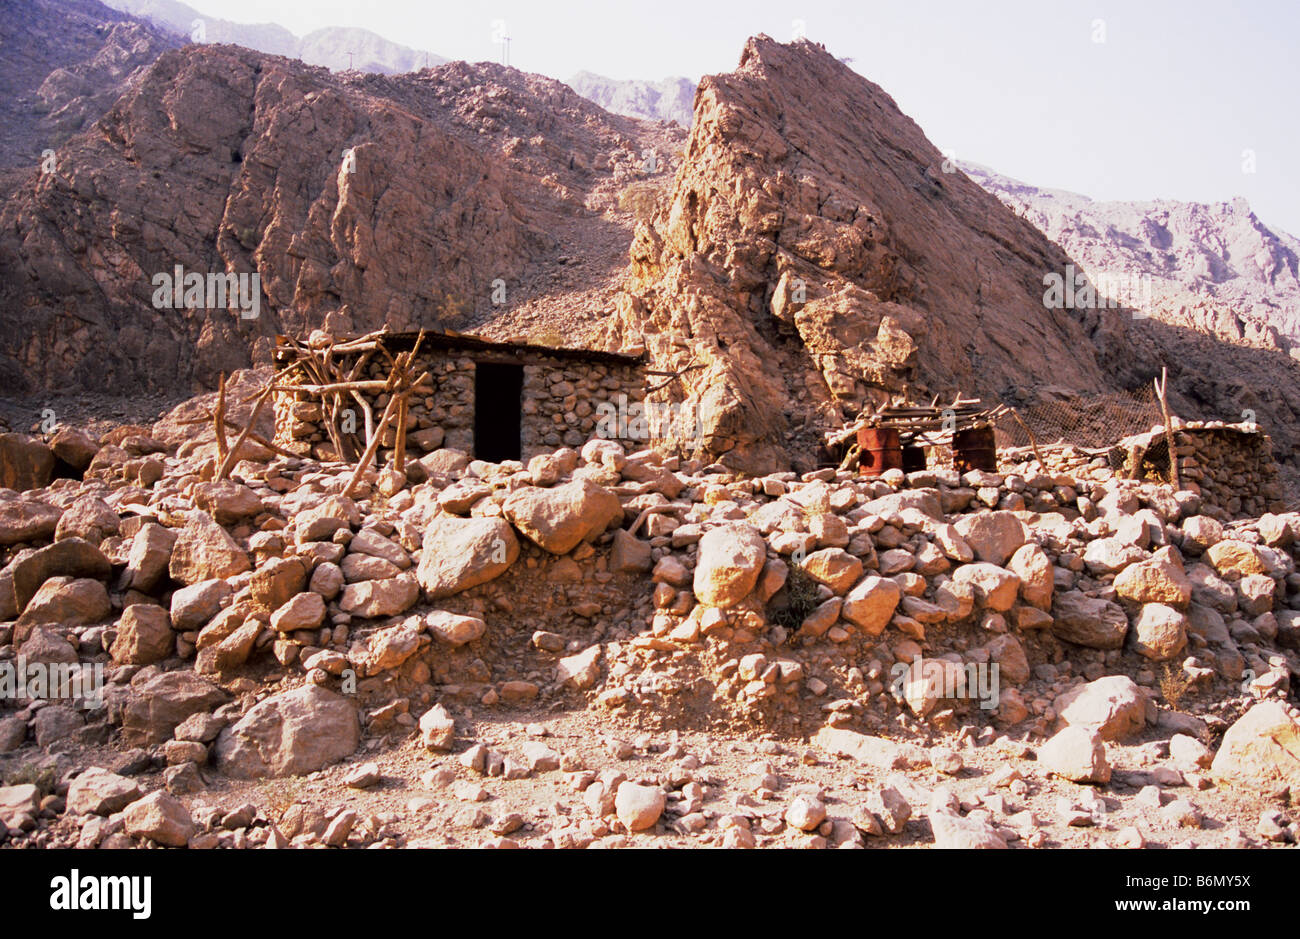 Deserted stone hut by track side in the Musandam mountains, probably a goat herders refuge or road workers refuge. Oman. Stock Photo